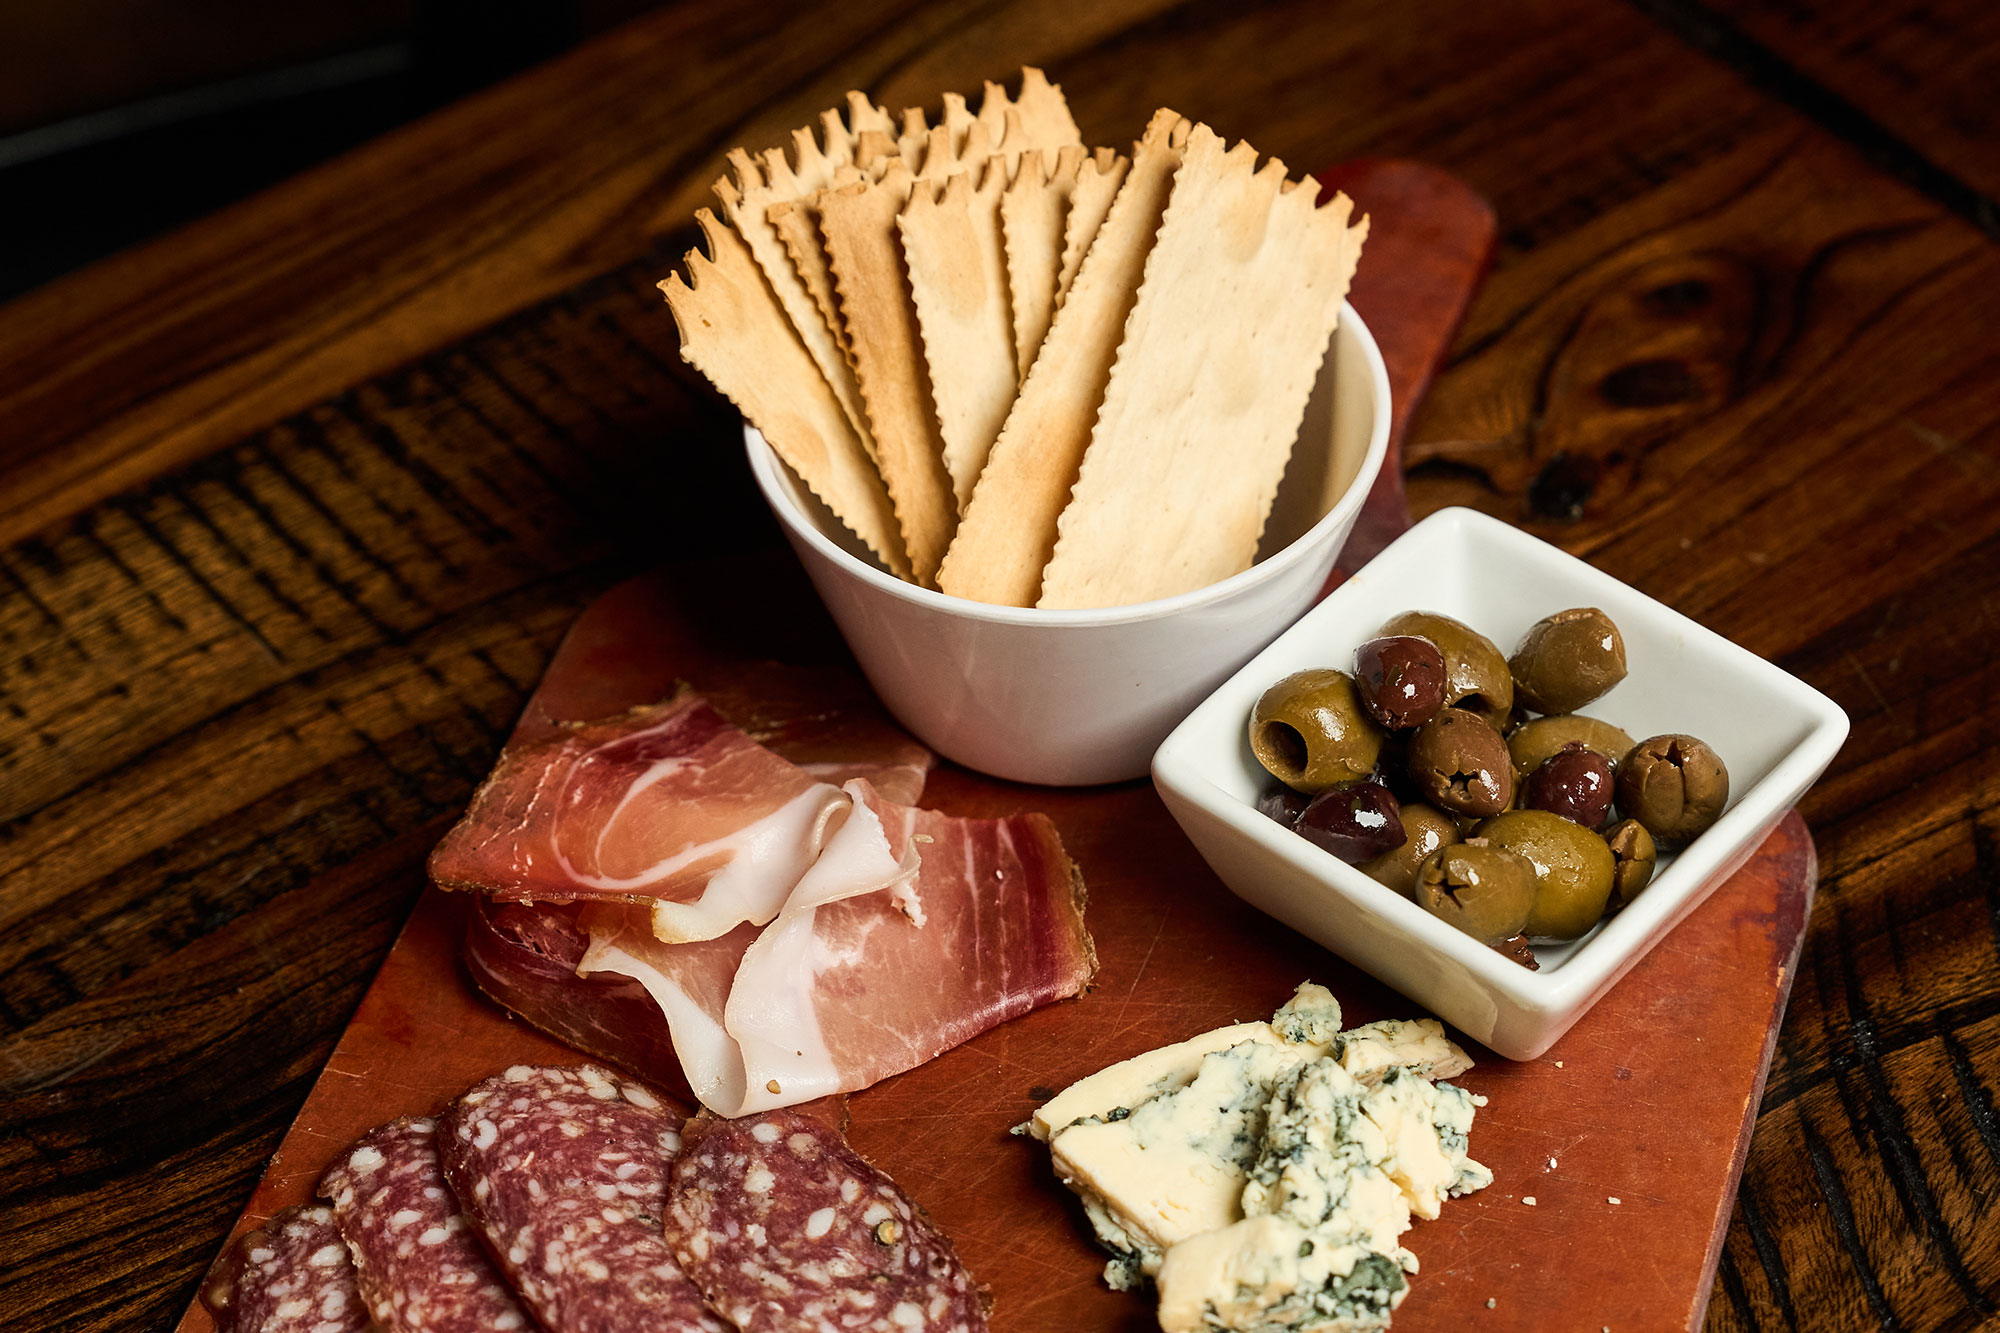 Charcuterie board, crackers, cured meats, olives and cheese